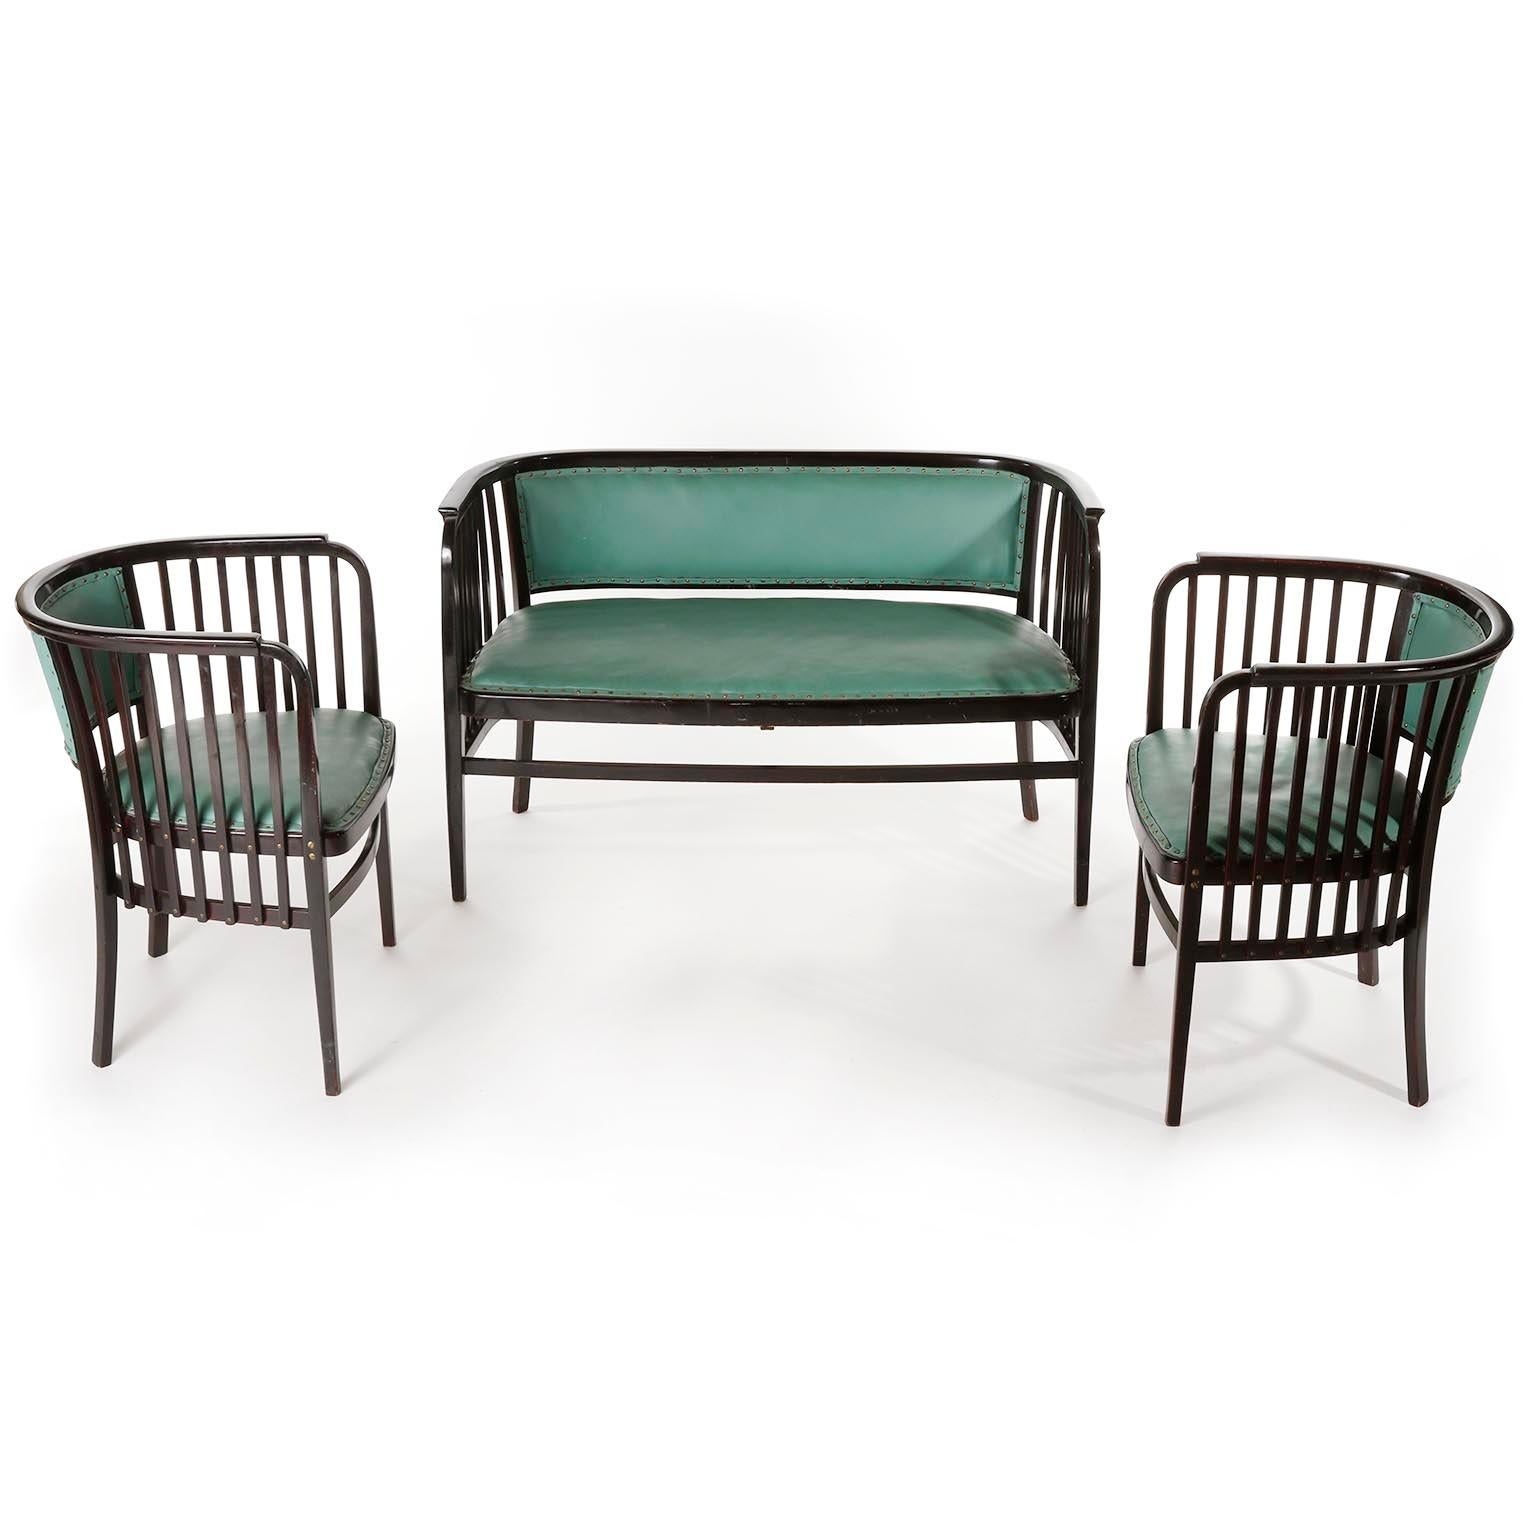 Stained Pair of Armchairs Chairs Marcel Kammerer, Thonet, Turquoise Green Leather, 1910 For Sale